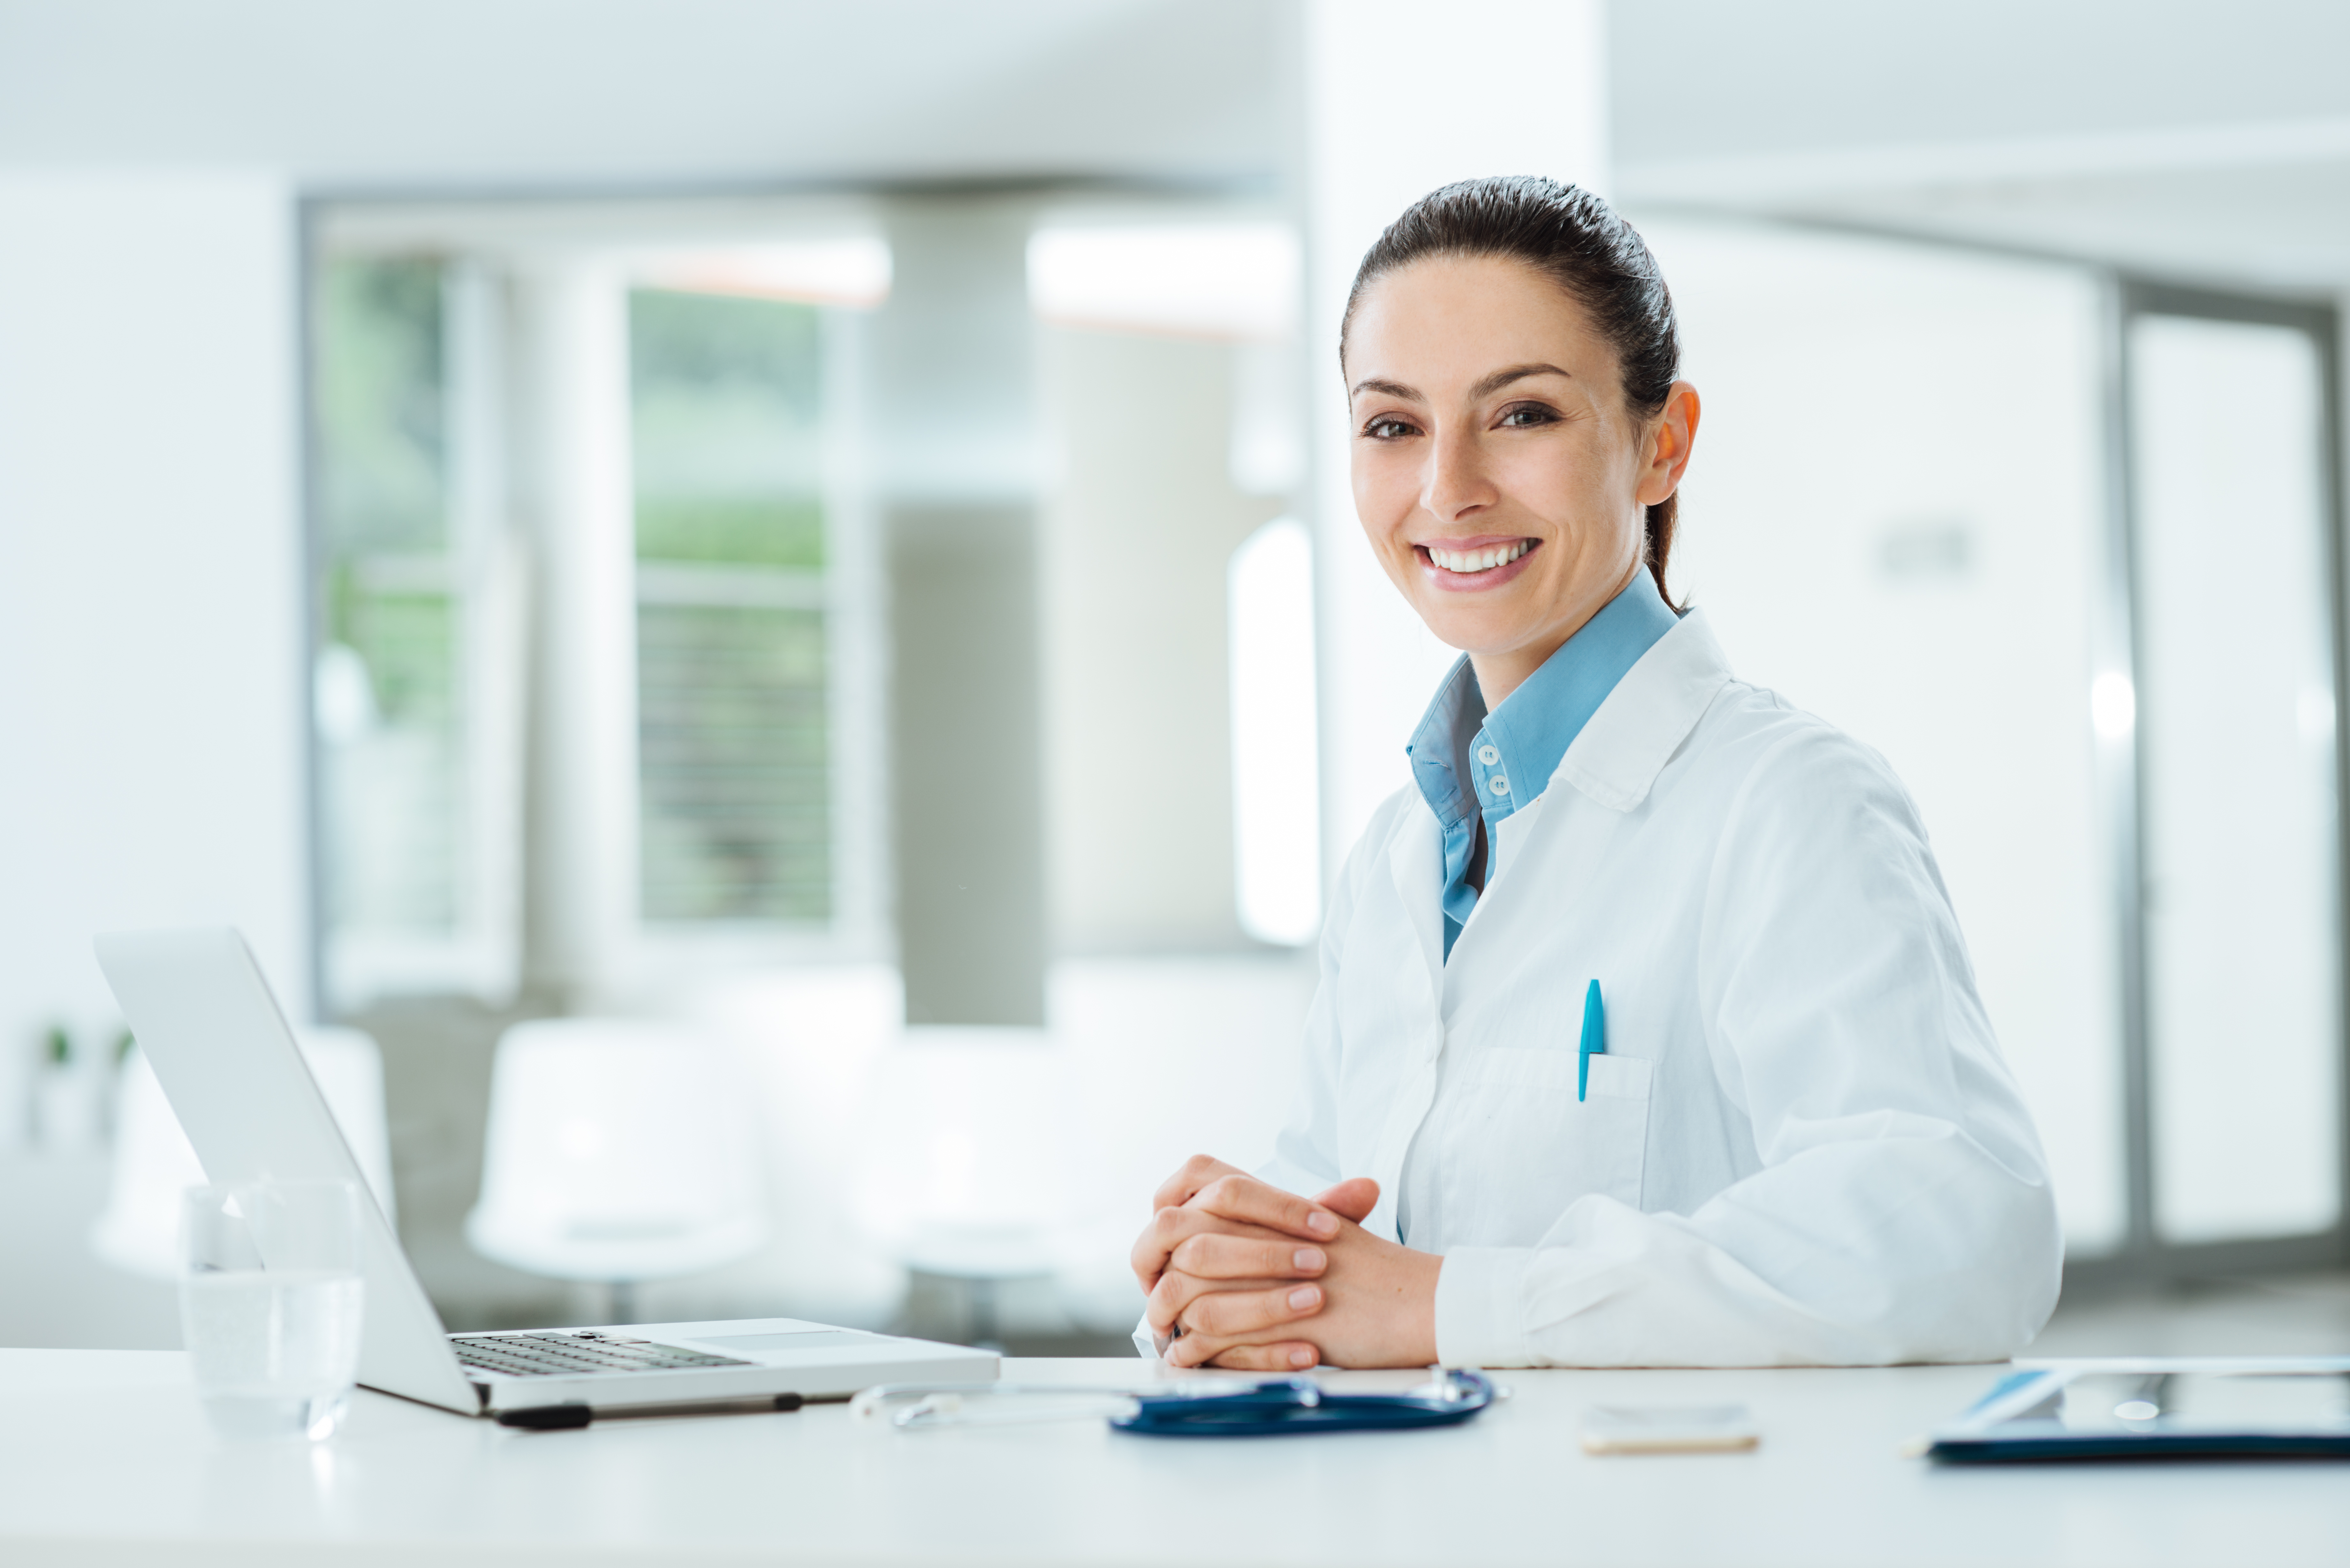 Smiling female doctor with laptop